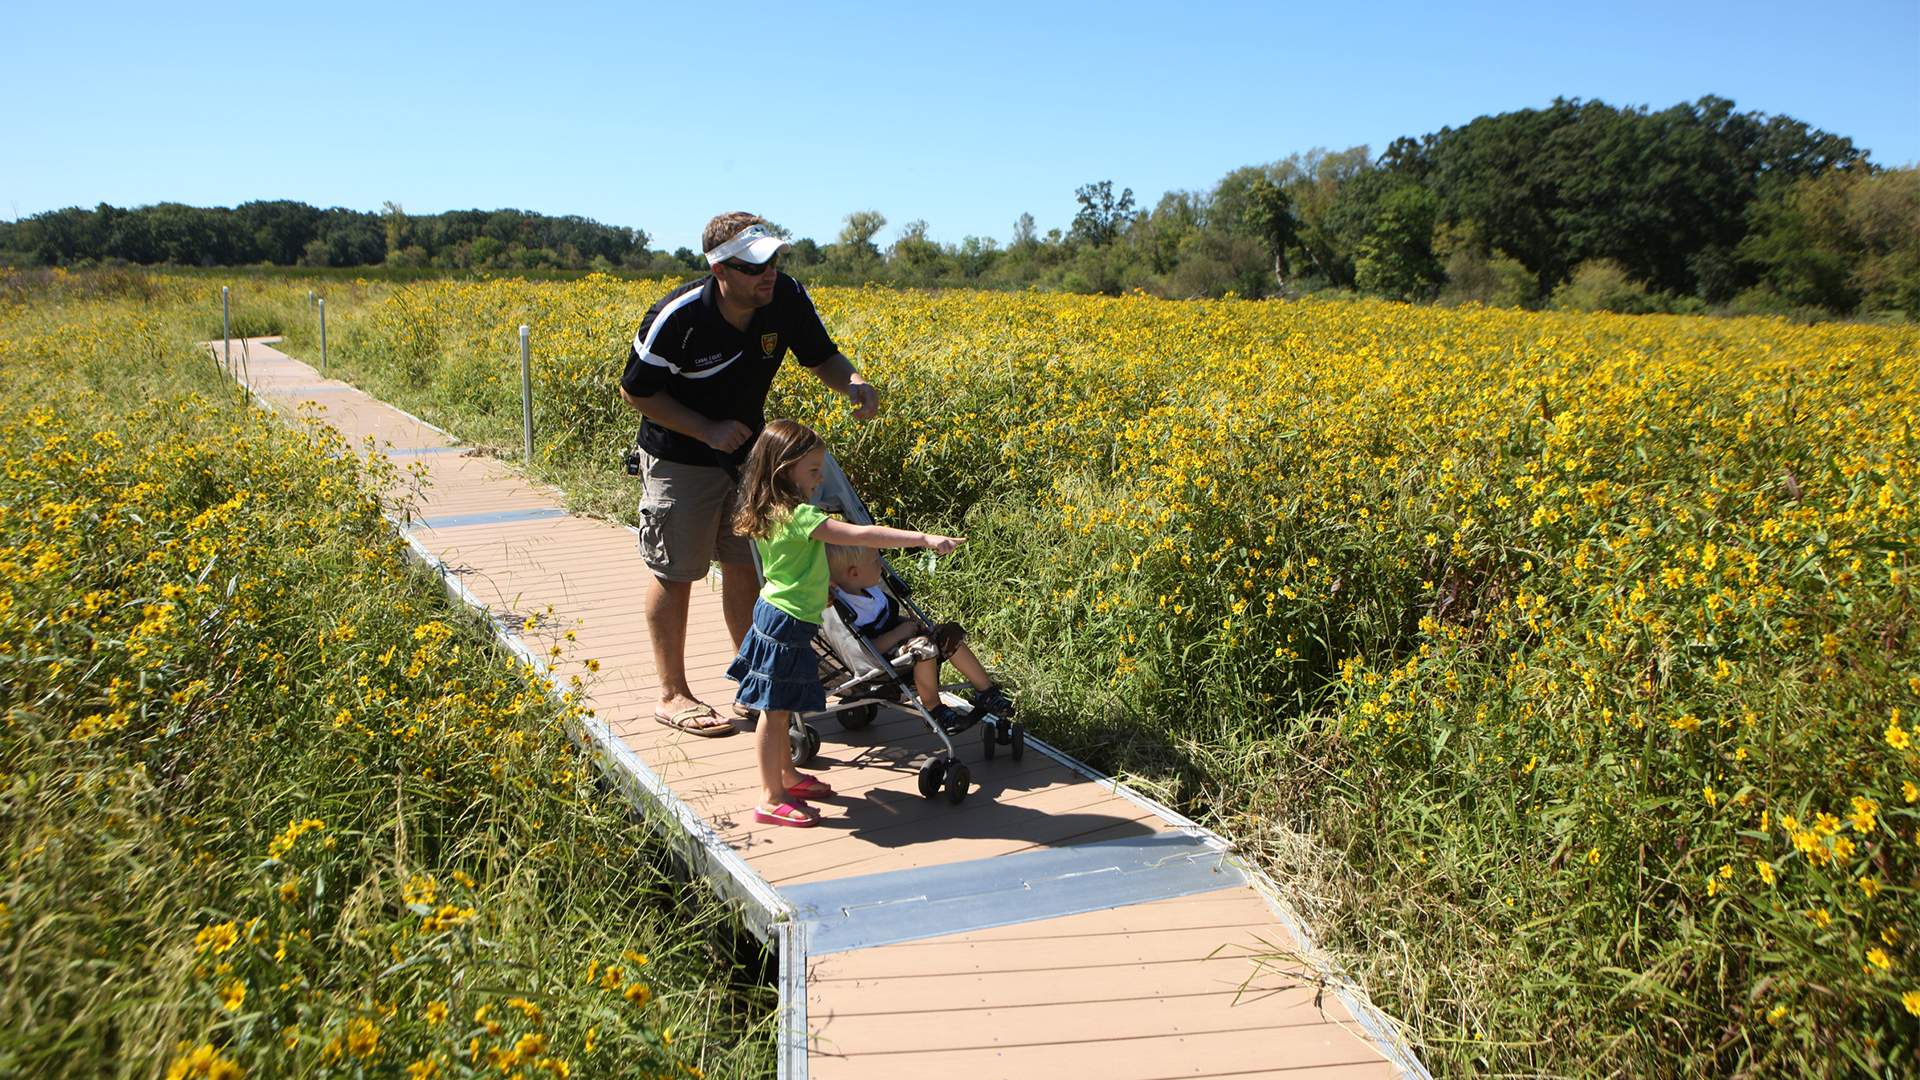 A man with two small children on a boardwalk amidst yellow flowers